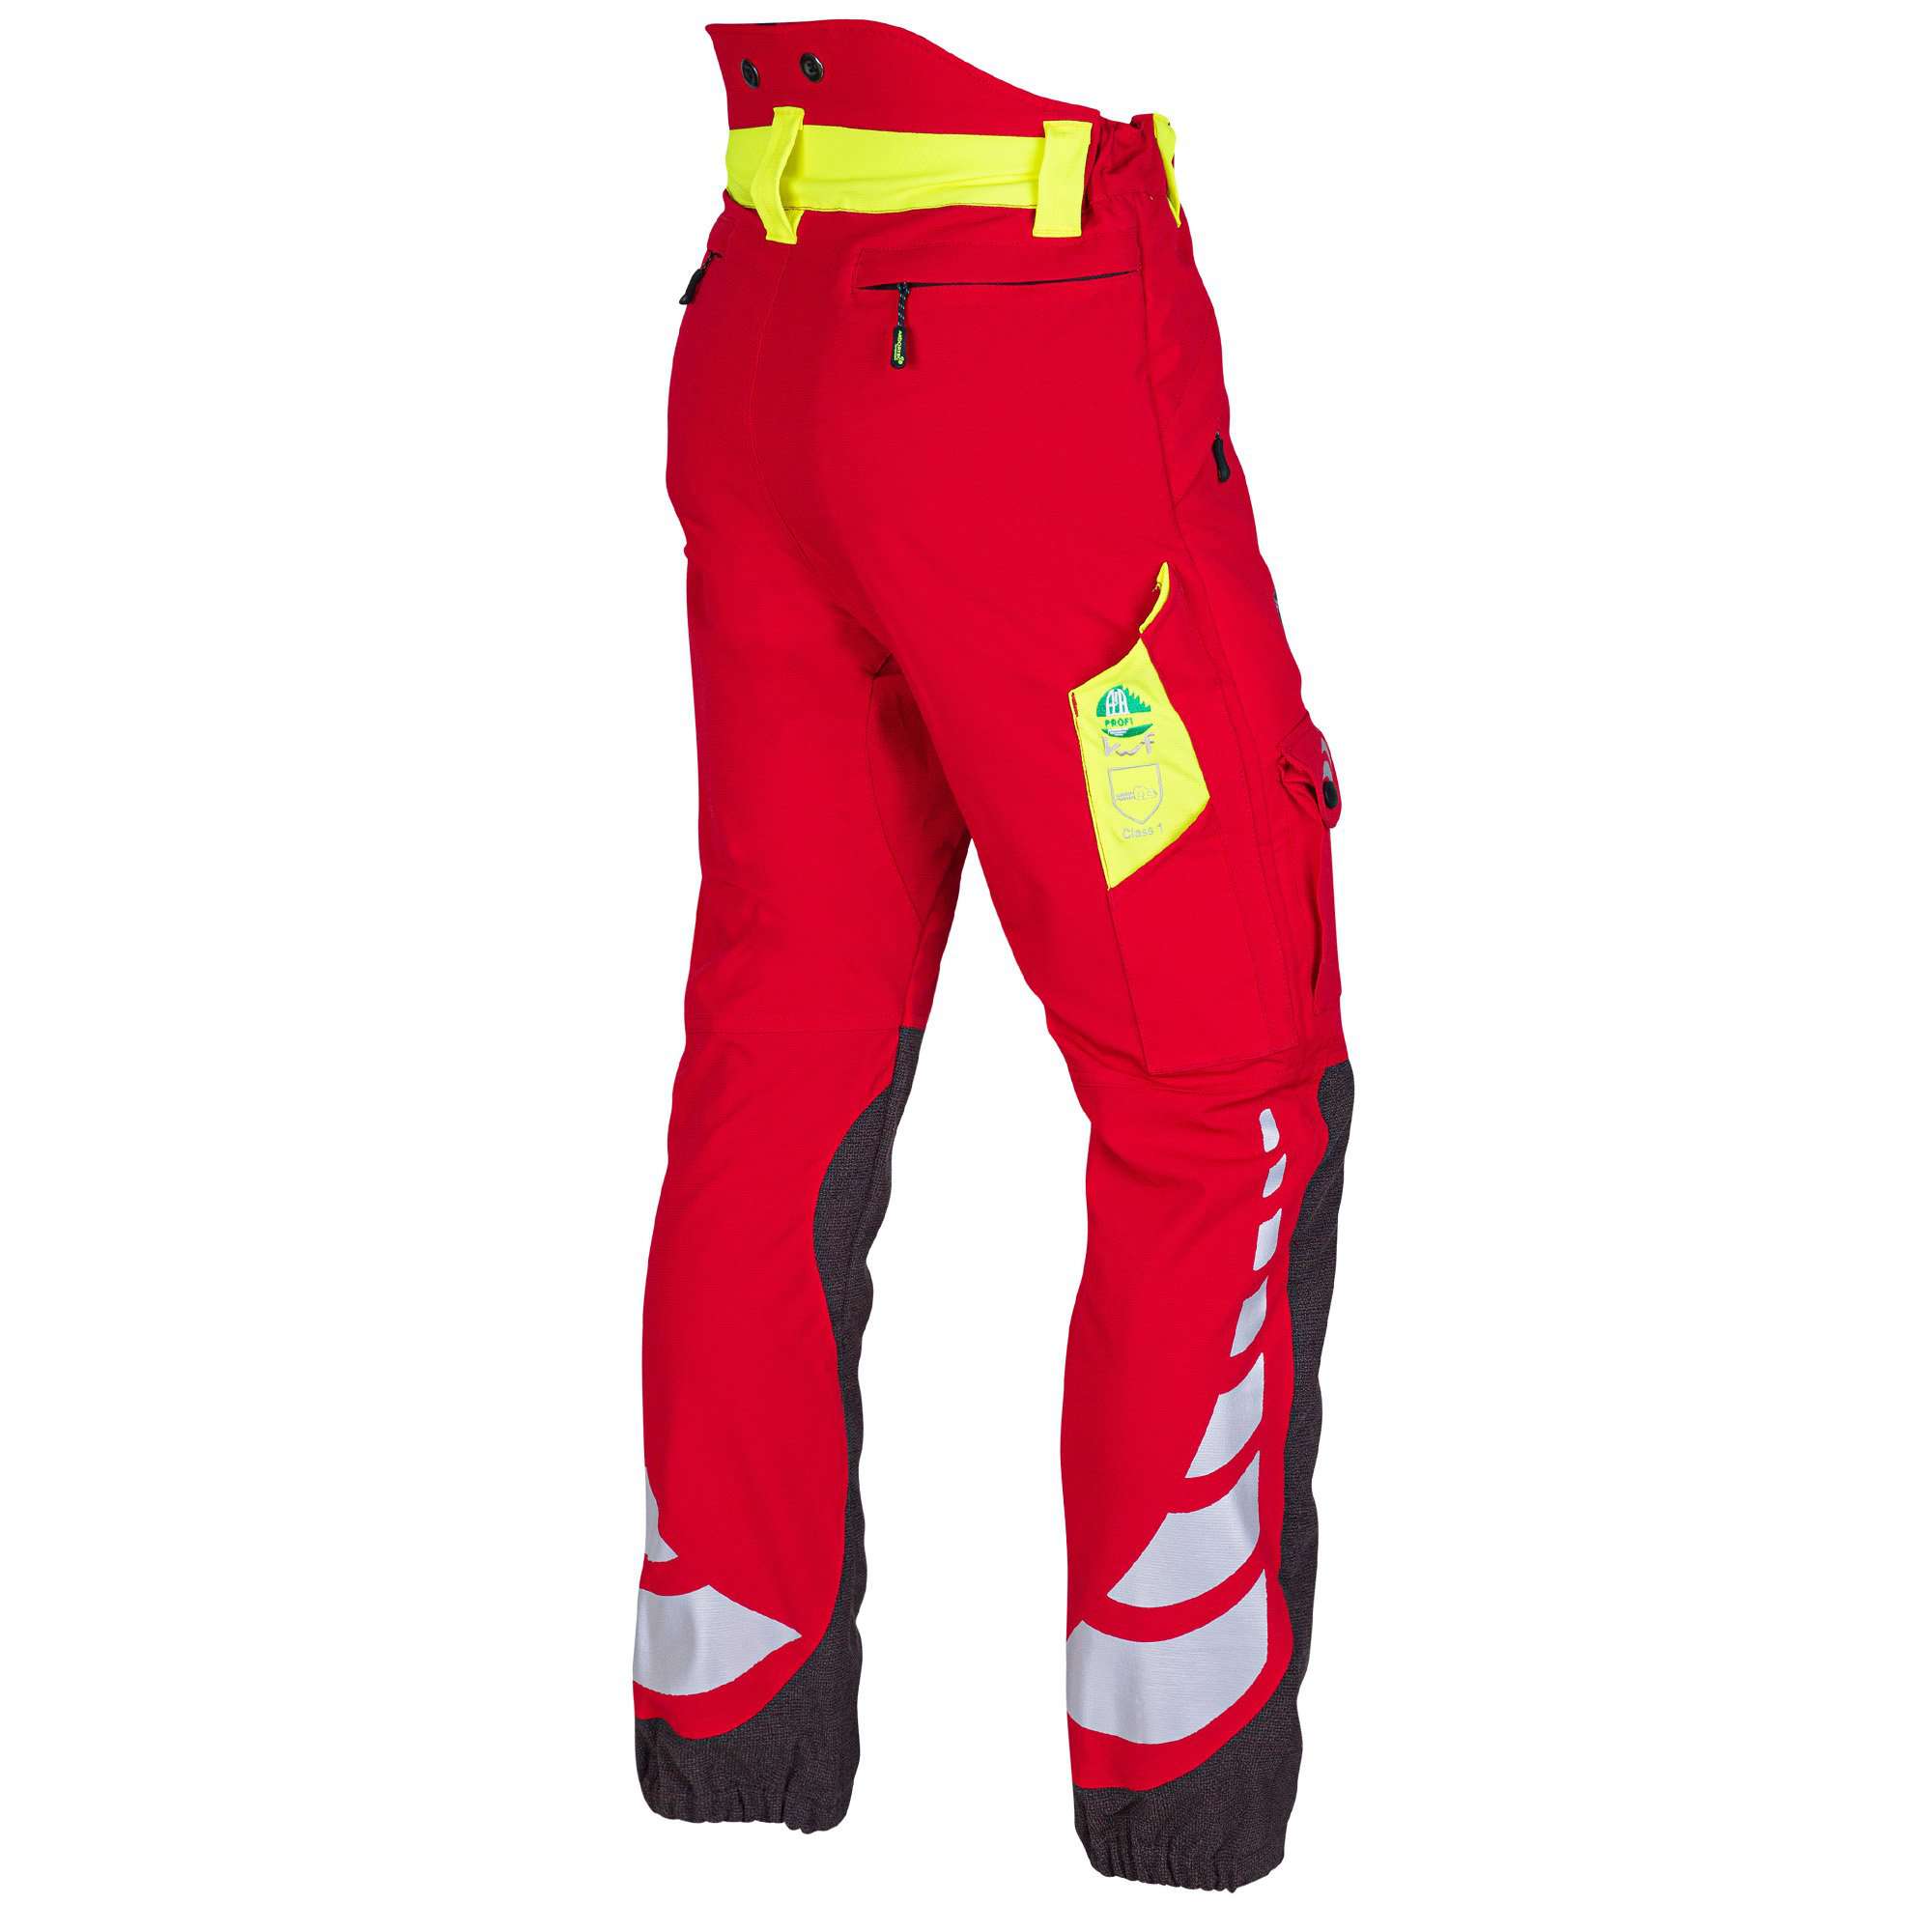 AT4050 Breatheflex Type C Class 1 Chainsaw Trousers - Red - Arbortec Forestwear